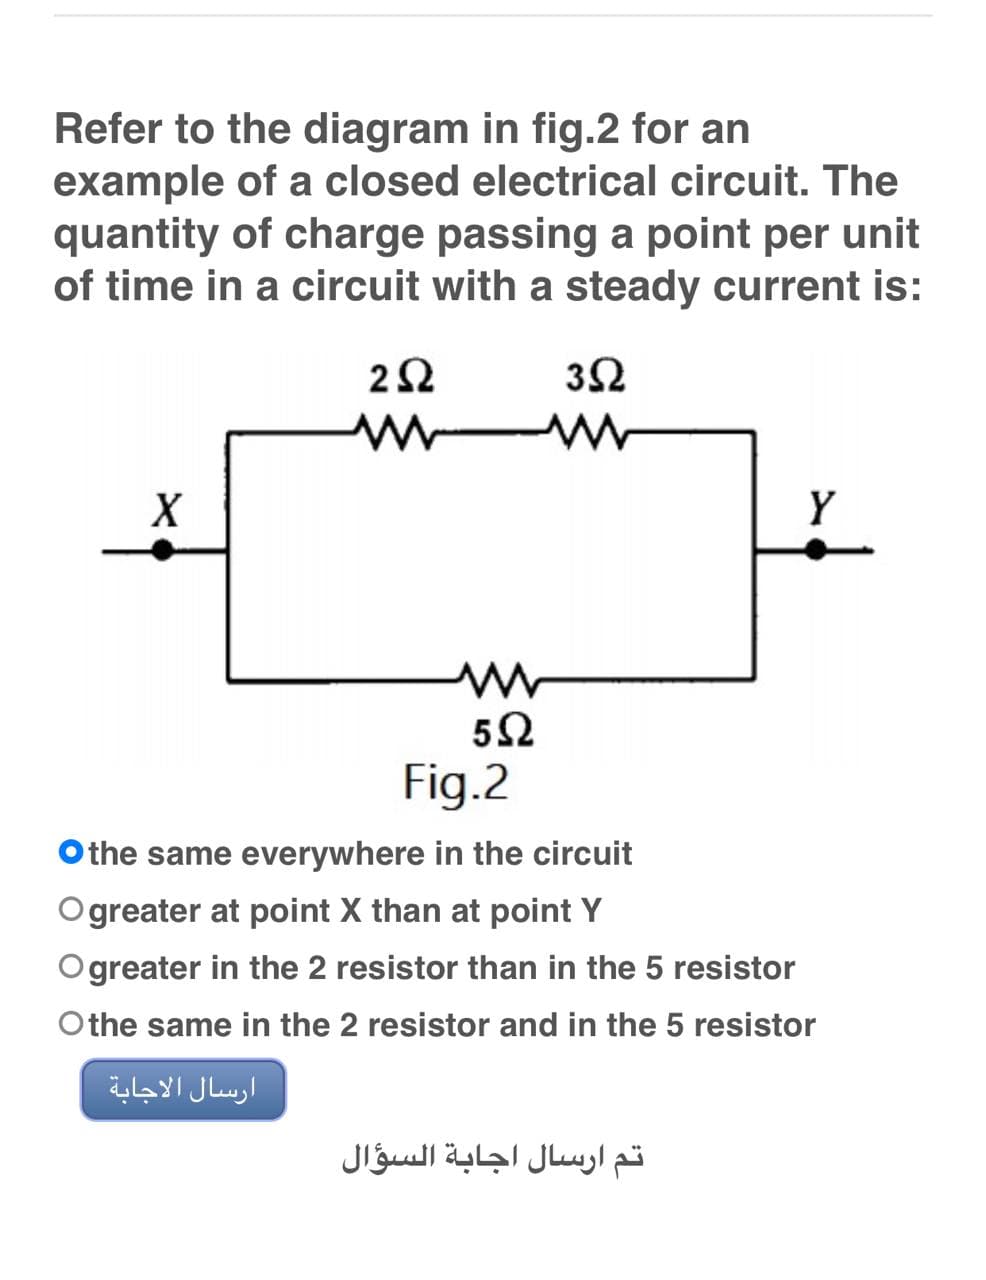 Refer to the diagram in fig.2 for an
example of a closed electrical circuit. The
quantity of charge passing a point per unit
of time in a circuit with a steady current is:
252
352
www
X
Y
Fig.2
Othe same everywhere in the circuit
Ogreater at point X than at point Y
Ogreater in the 2 resistor than in the 5 resistor
Othe same in the 2 resistor and in the 5 resistor
ارسال الاجابة
M
5Ω
تم ارسال اجابة السؤال